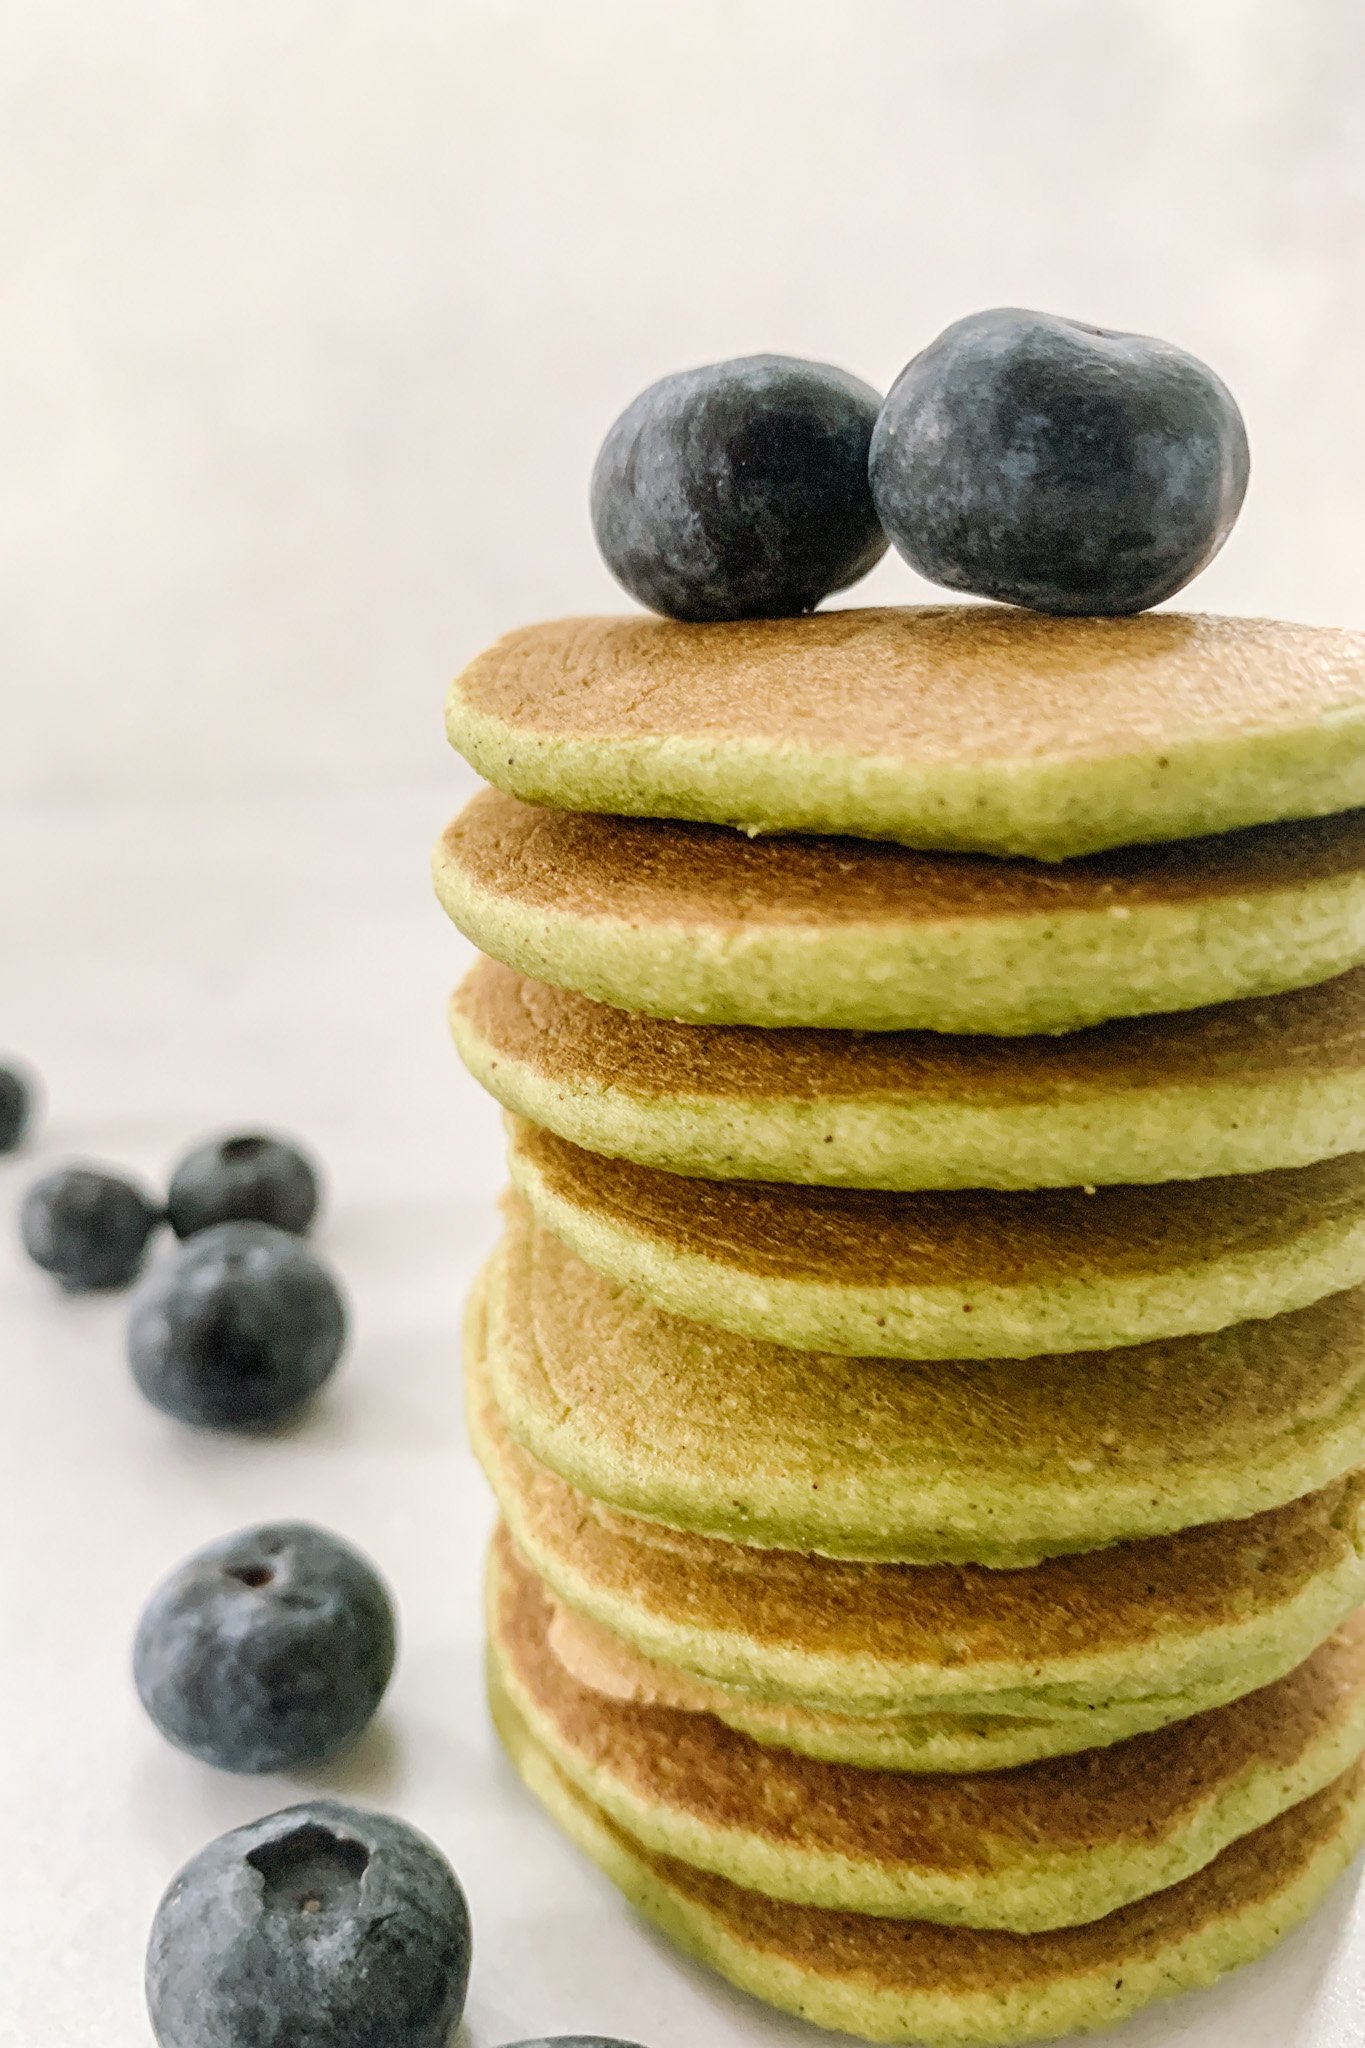 Spinach banana pancakes topped with blueberries